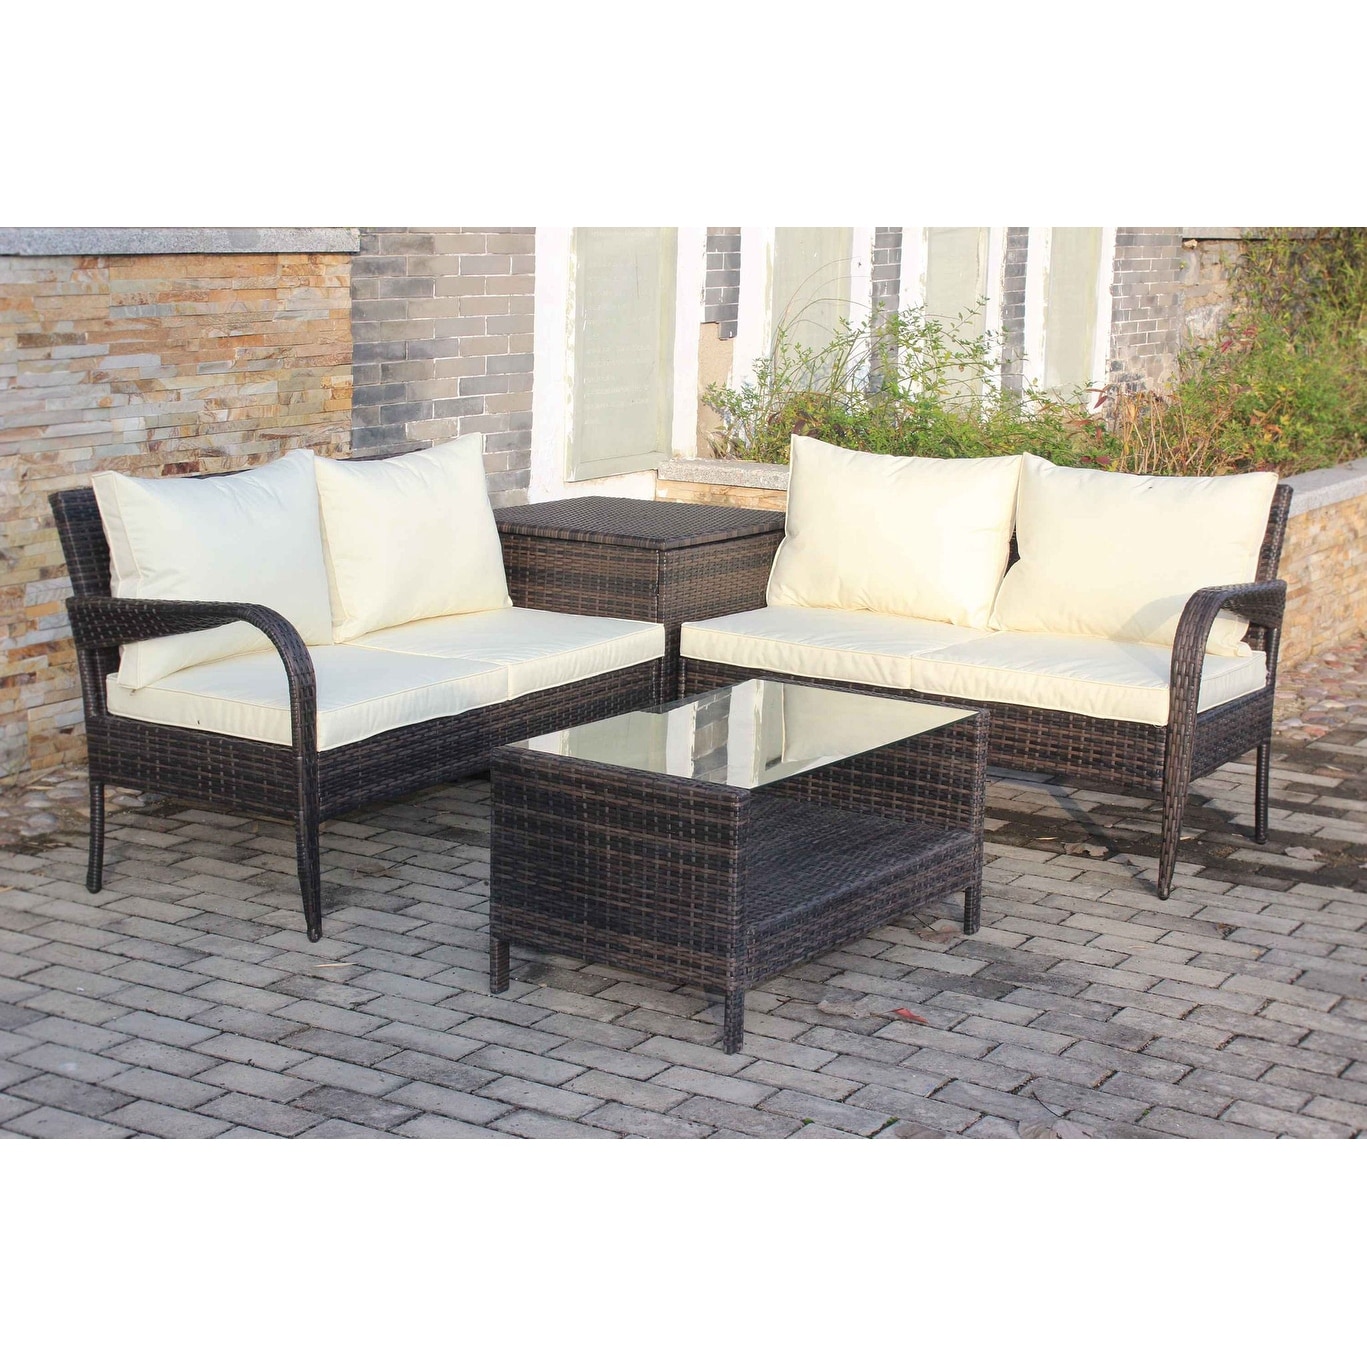 4 Piece Patio Sectional Wicker Rattan Outdoor Furniture Sofa Set With Storage Box Brown